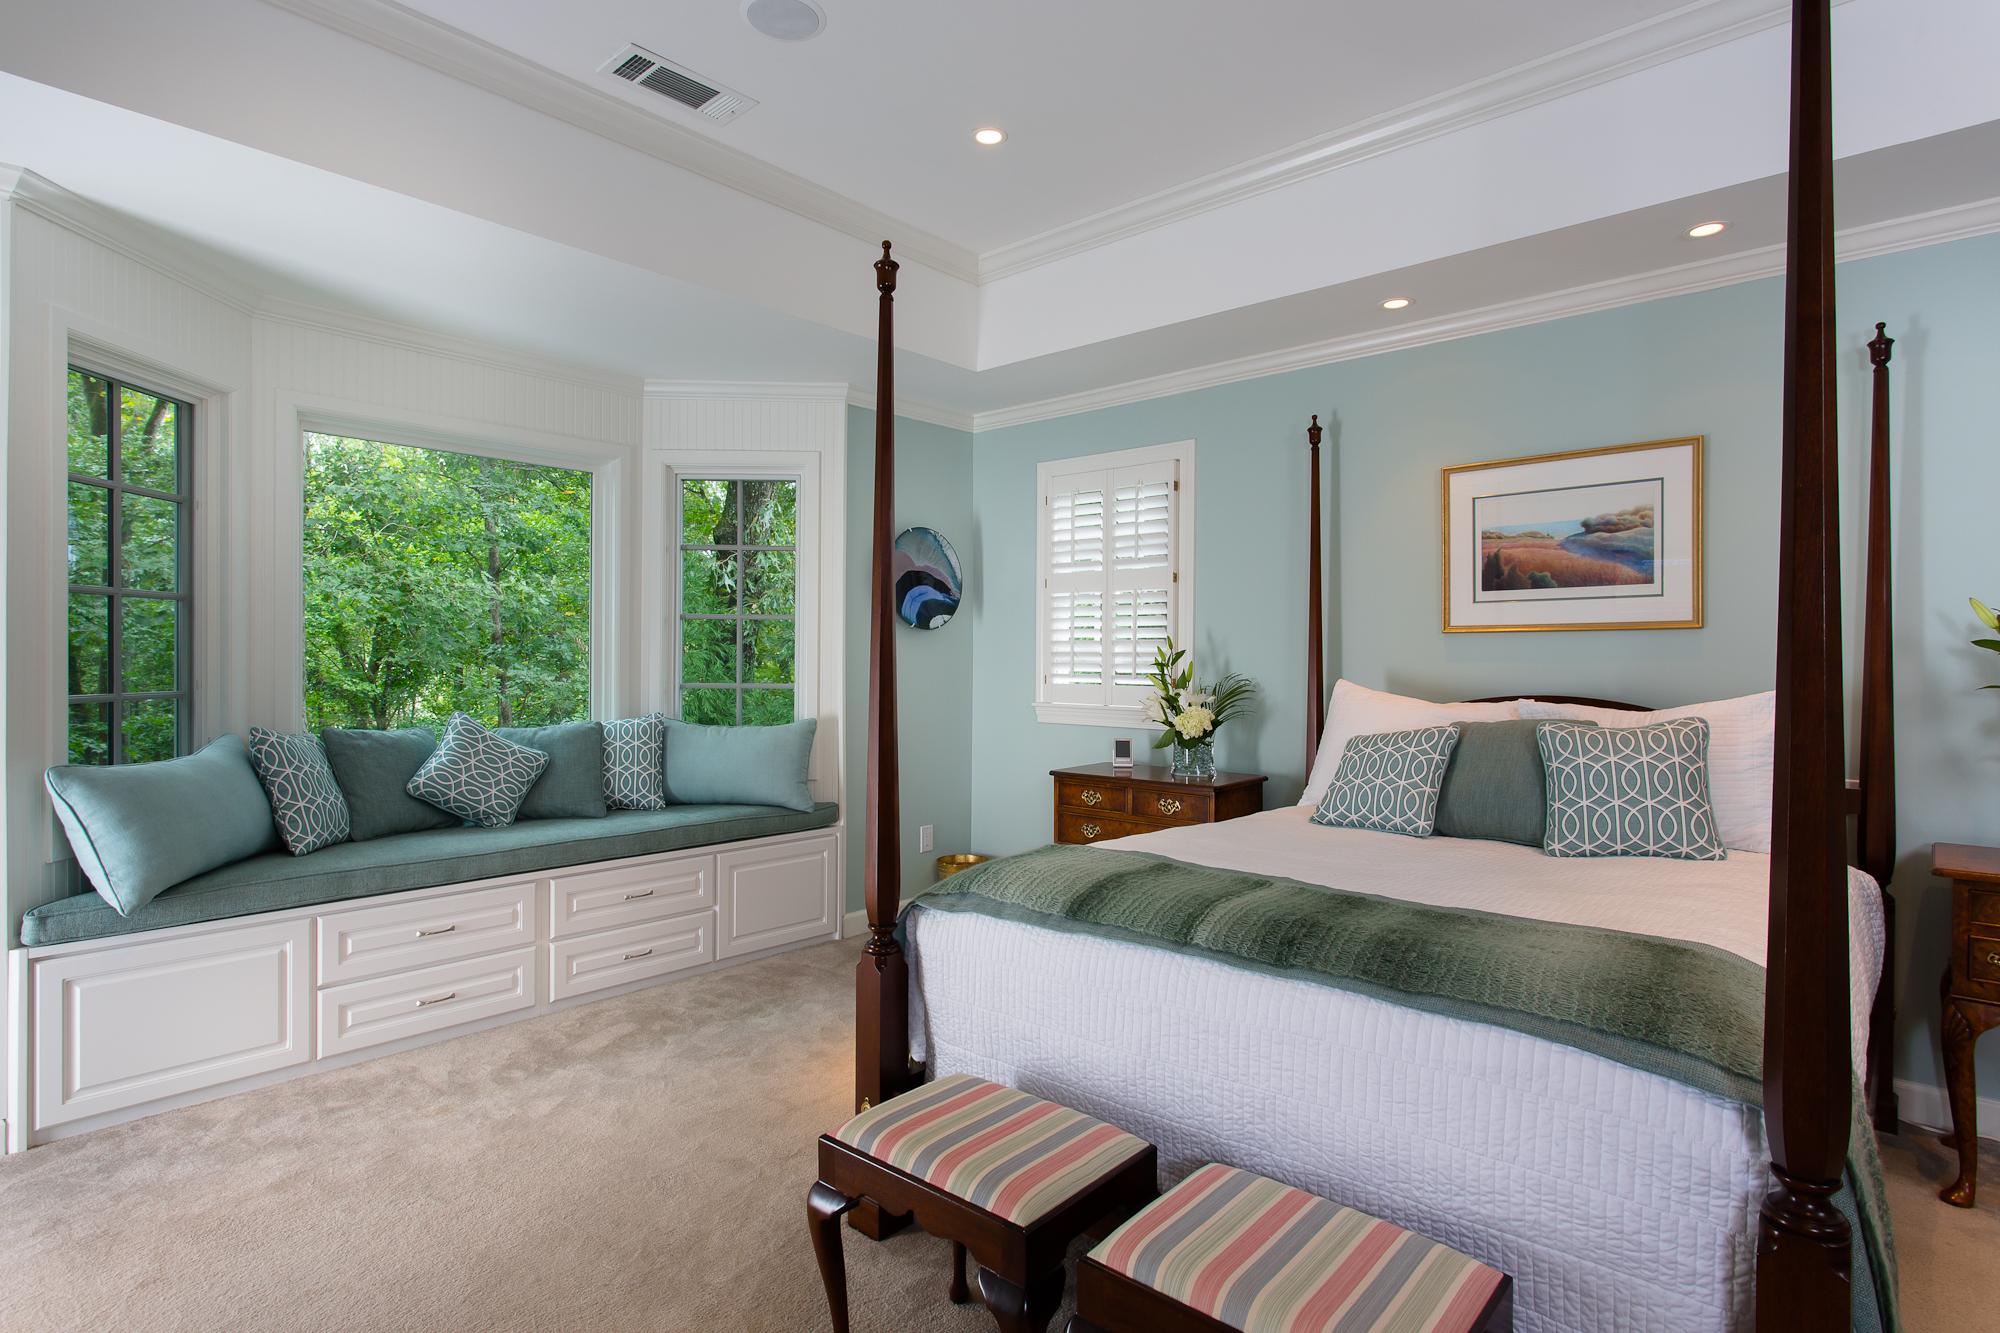 Featured on Houzz: 8 Ways to Create a Home That Helps You Recharge